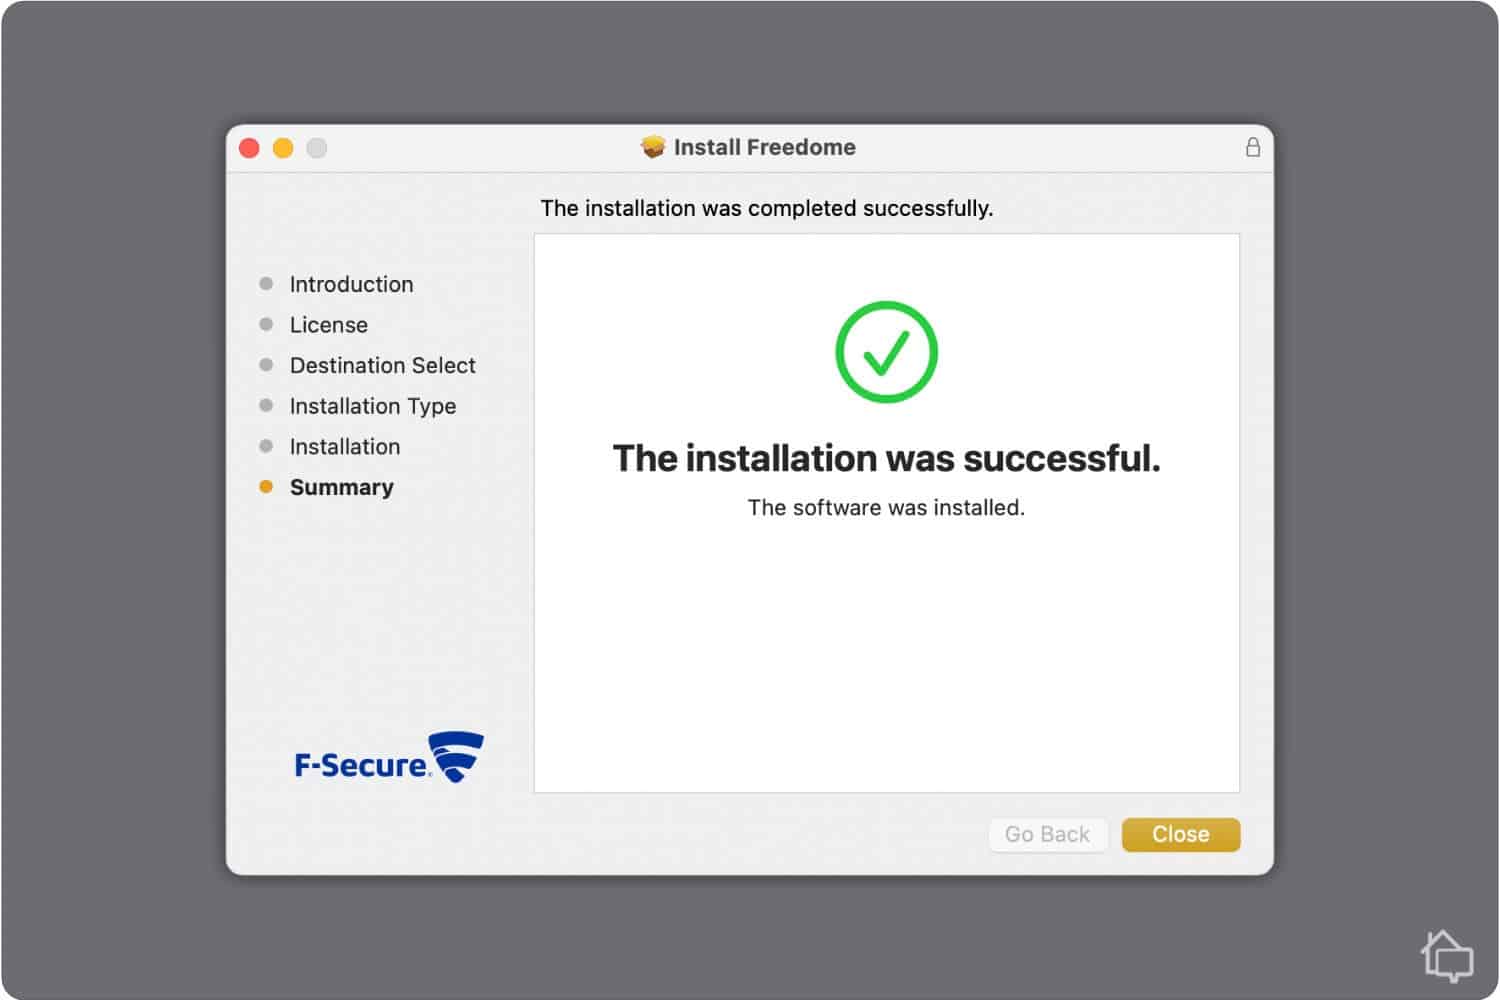 With F-Secure, I was up and running in under 120 seconds